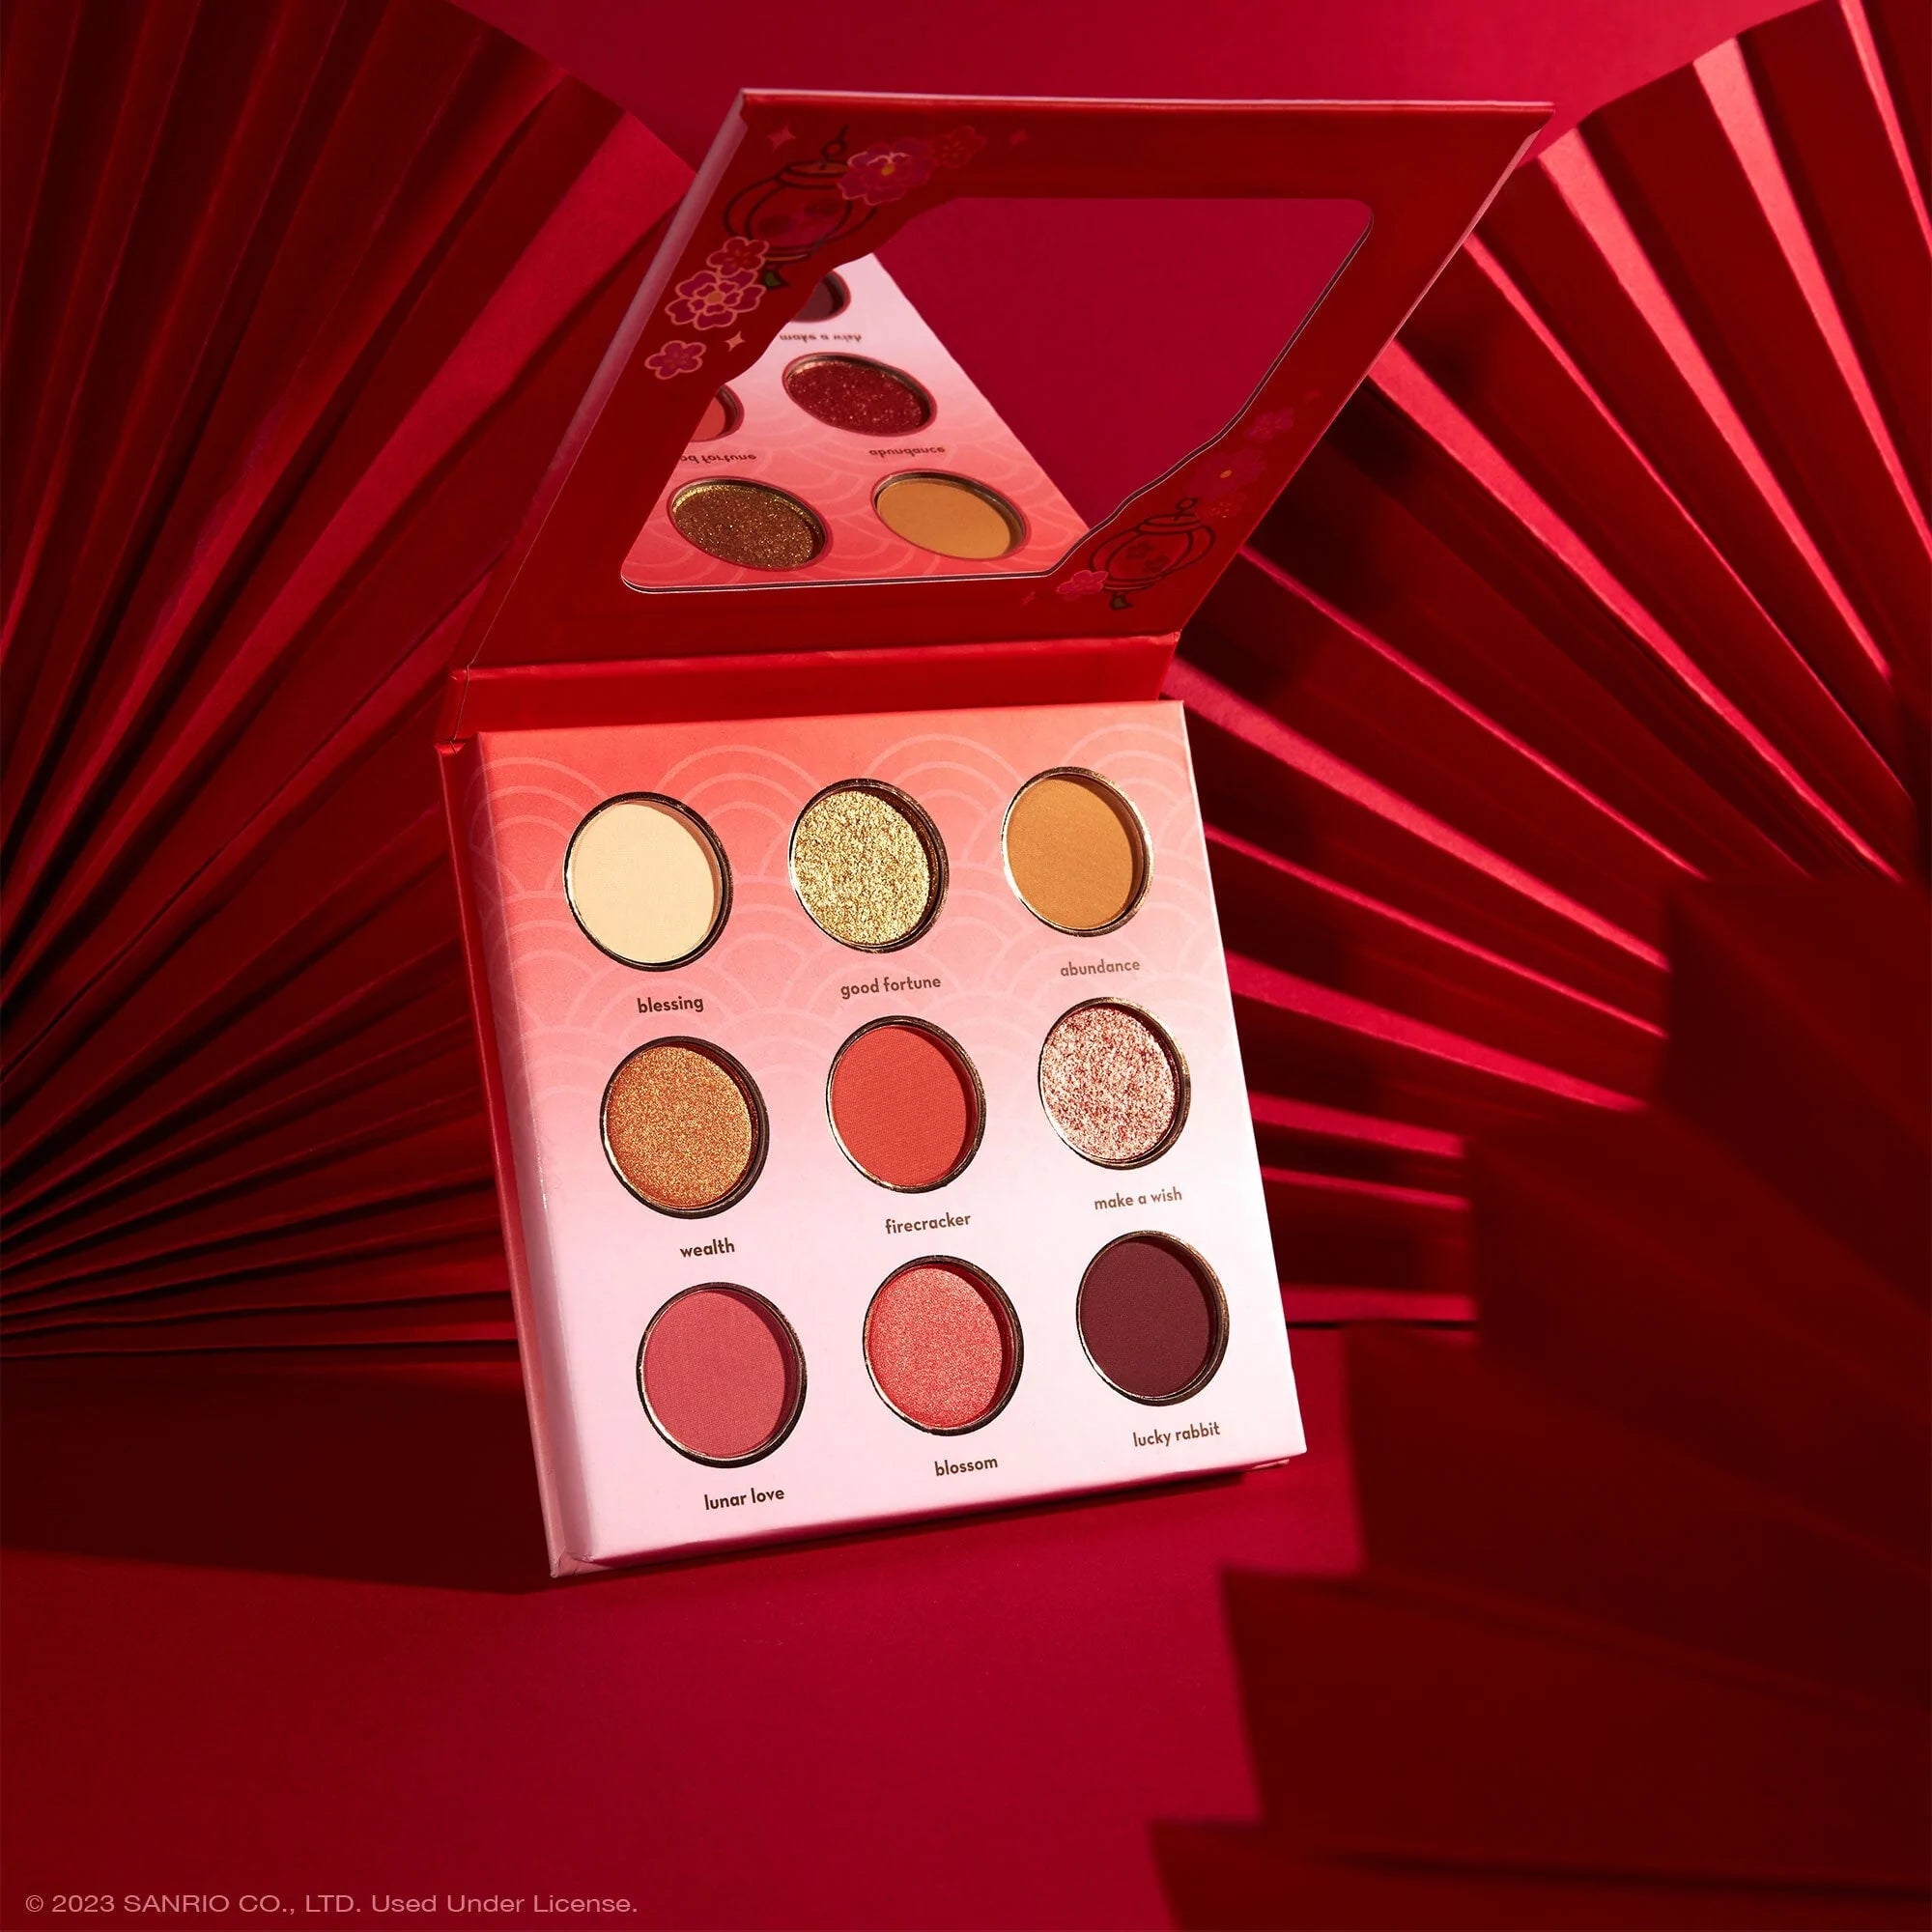 The Creme Shop - Hello Kitty and Friends Lunar New Year Palette